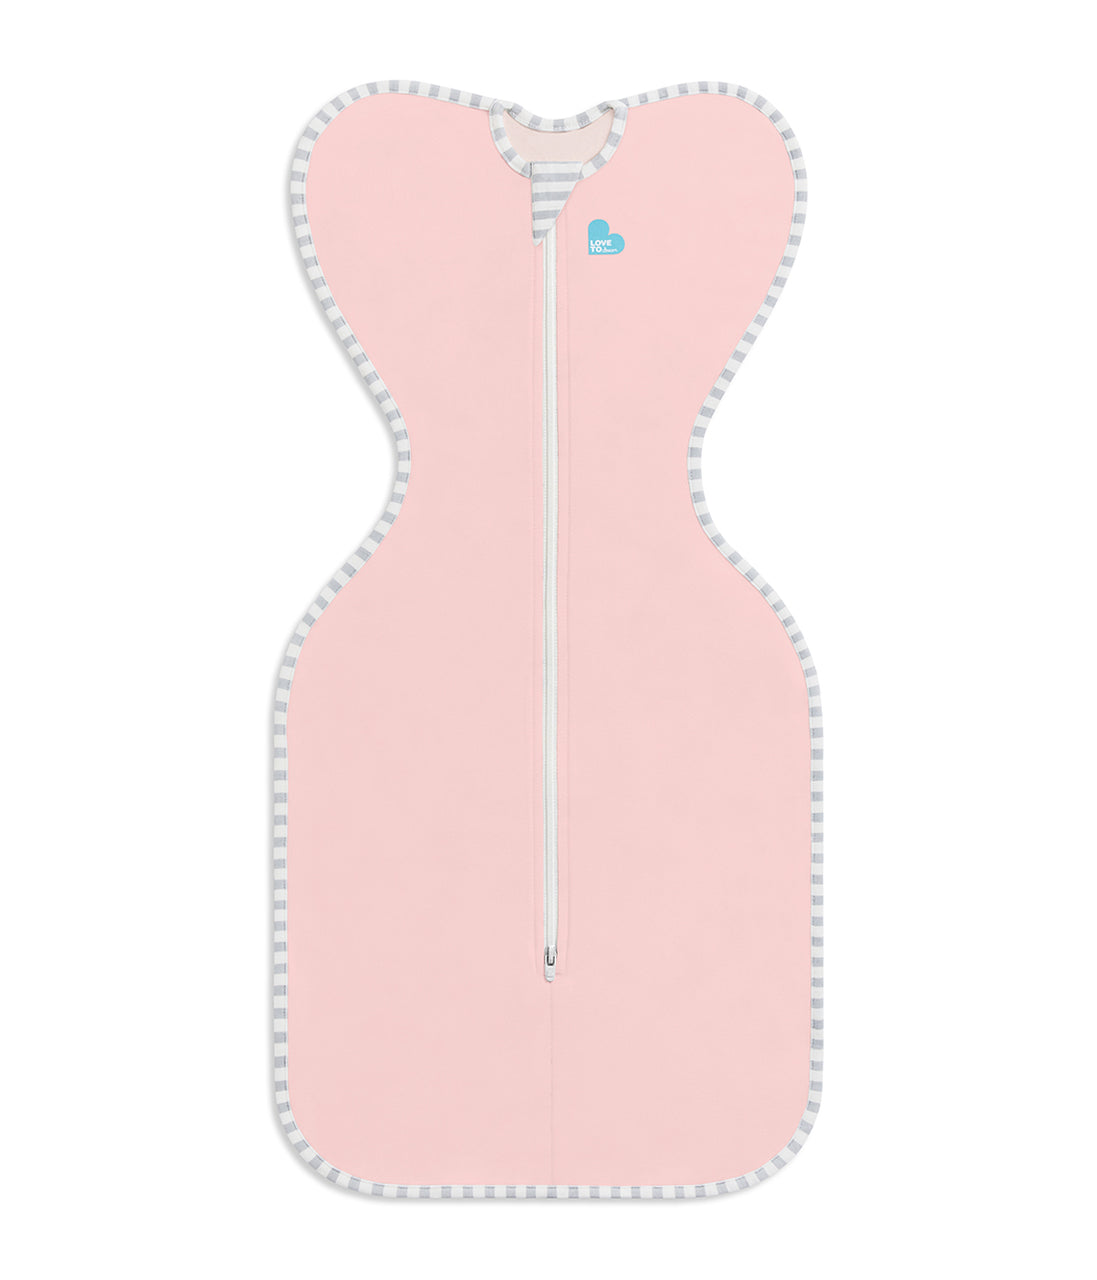 Love To Dream Swaddle Up Original 1.0 Tog - Dusty Pink